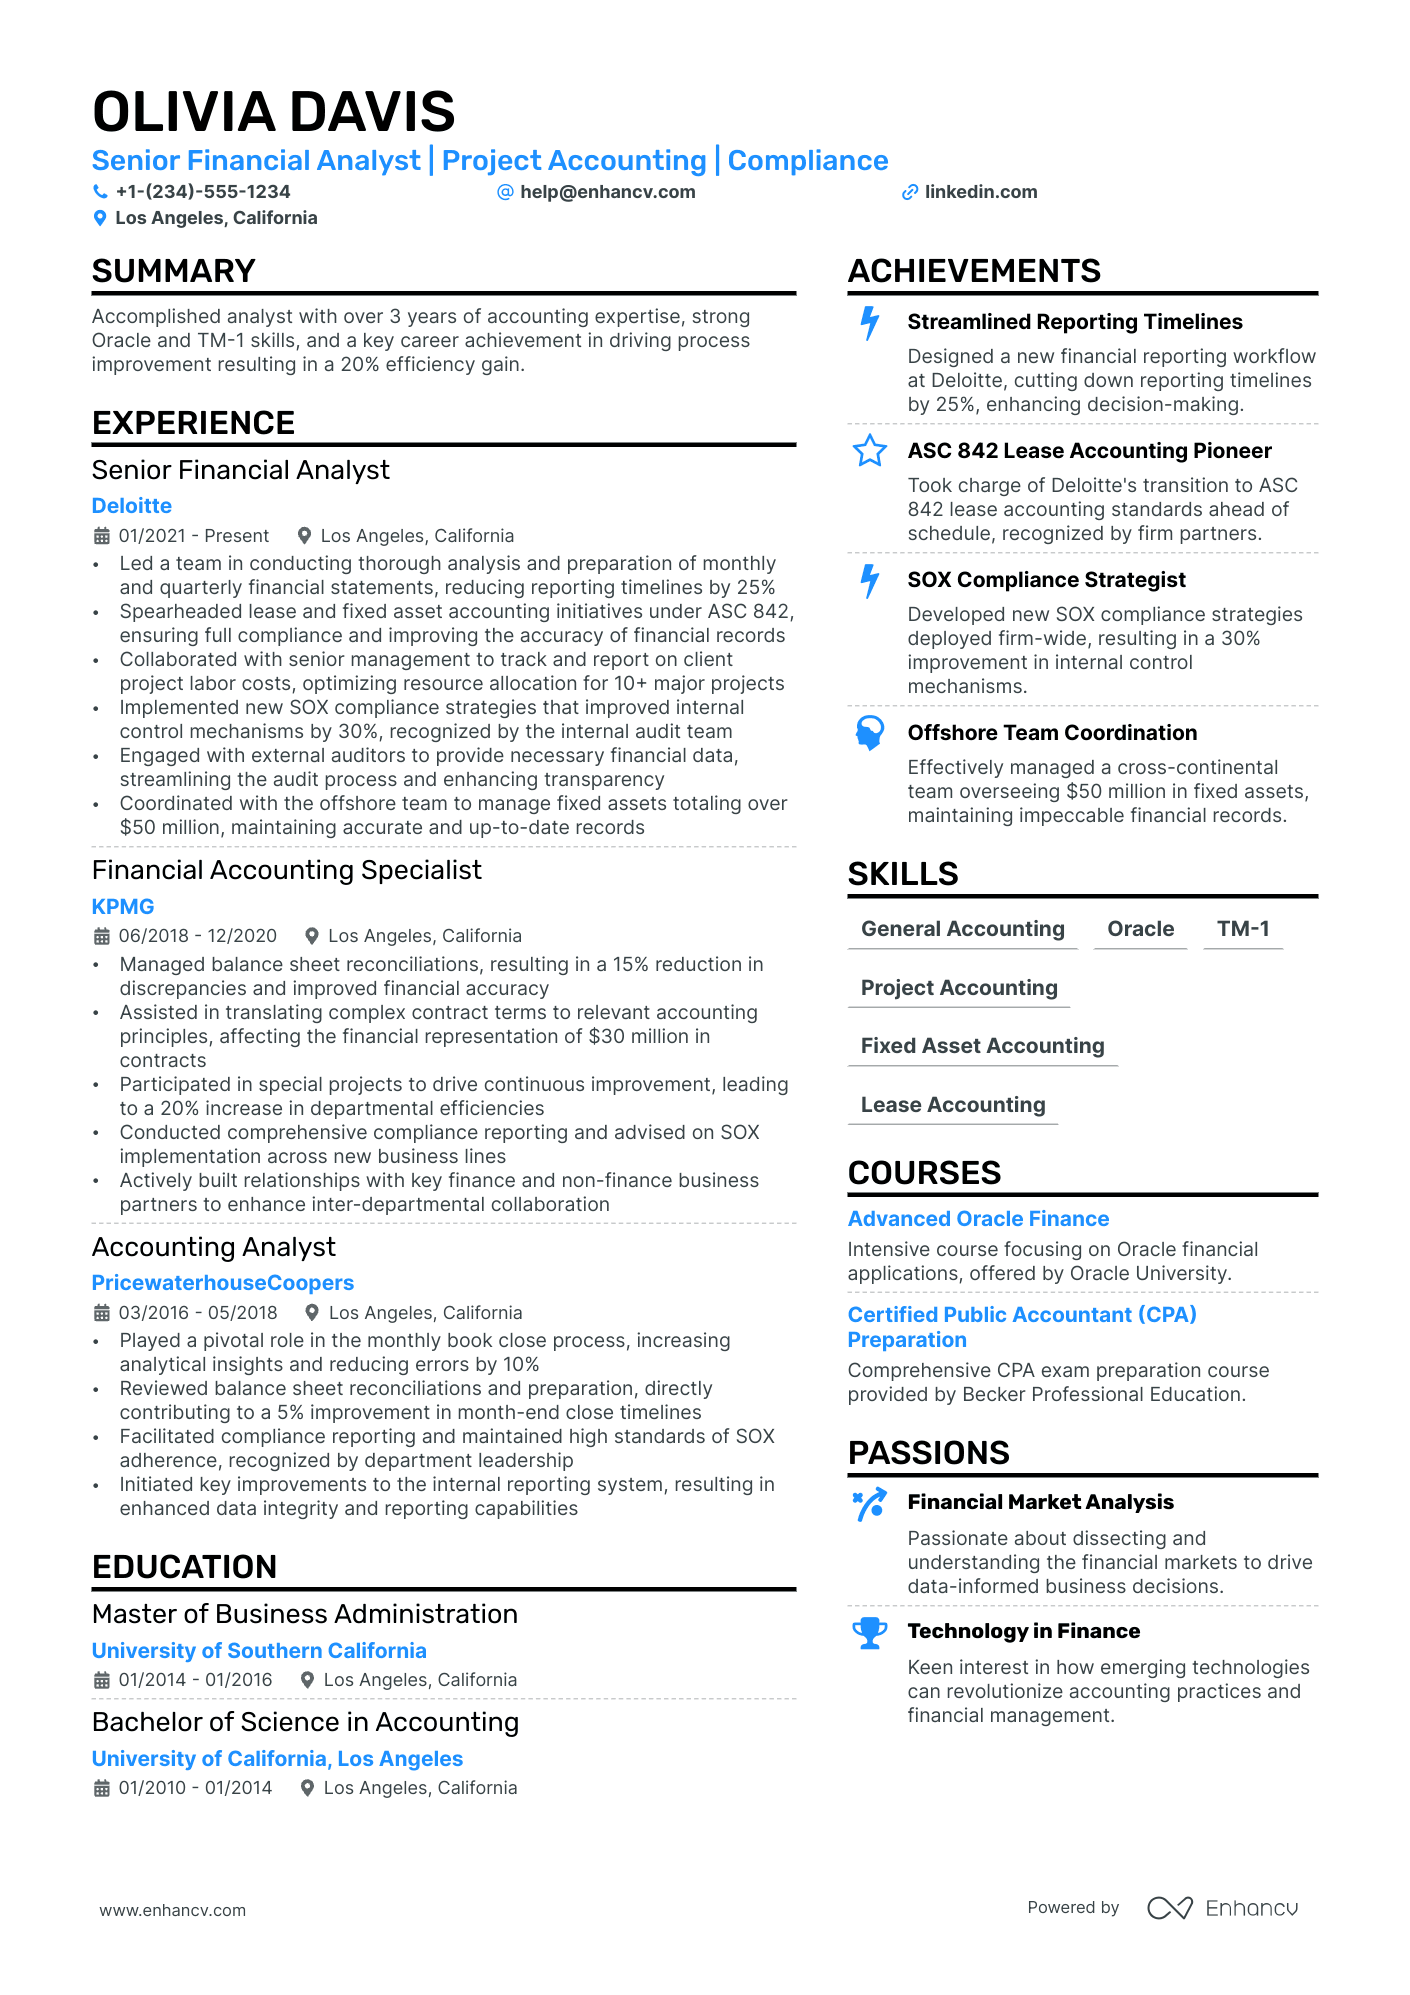 Functional Accounting resume example